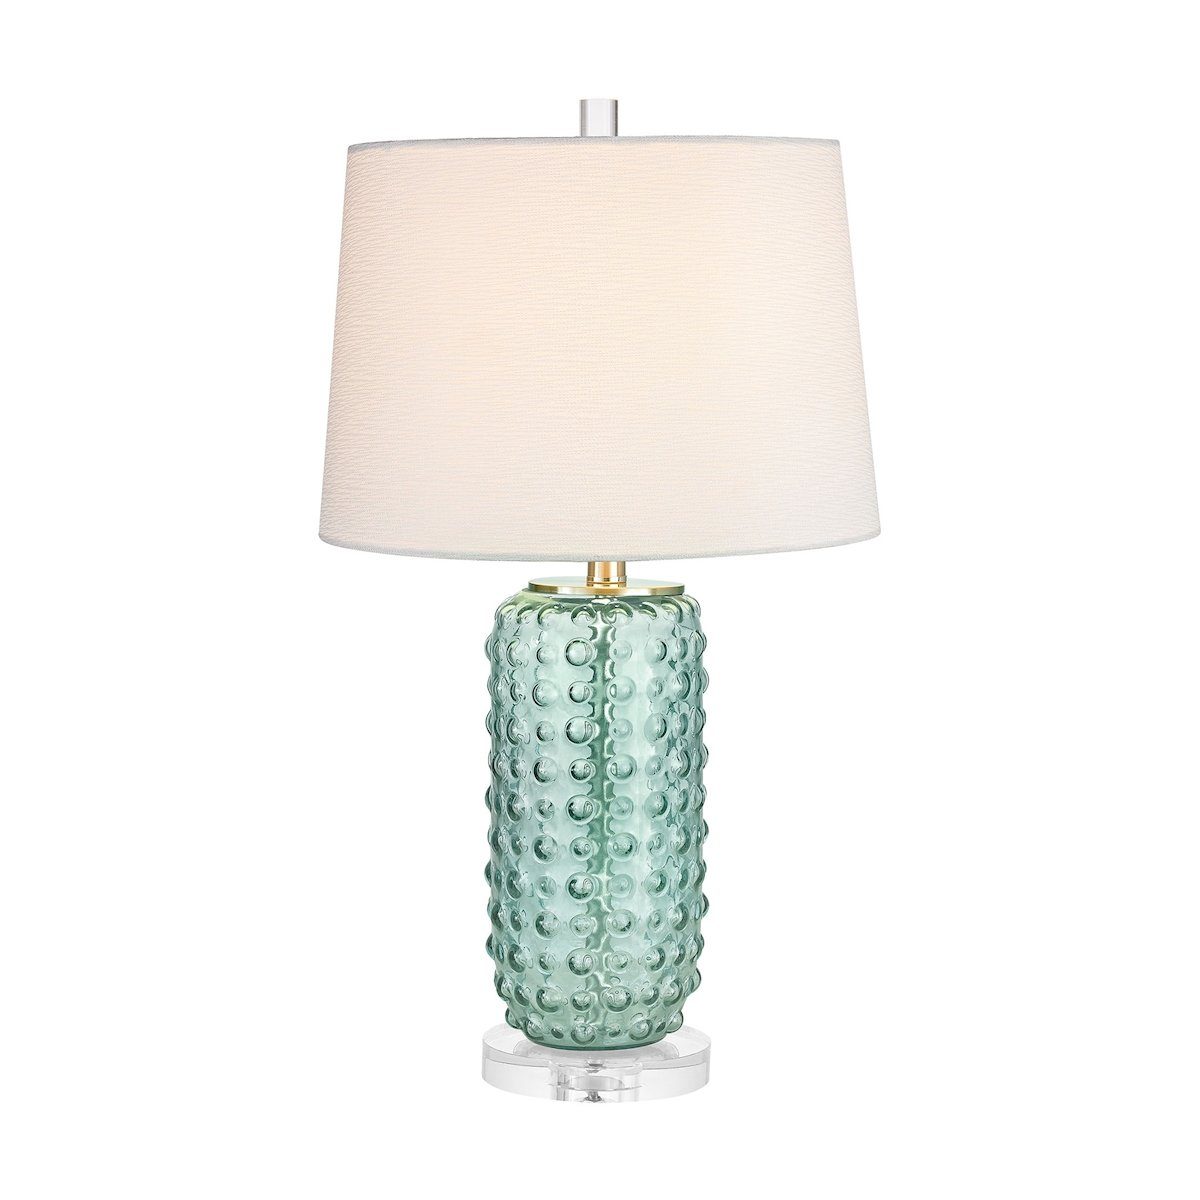 Caicos 25"h Table Lamp Lamps Dimond Lighting 